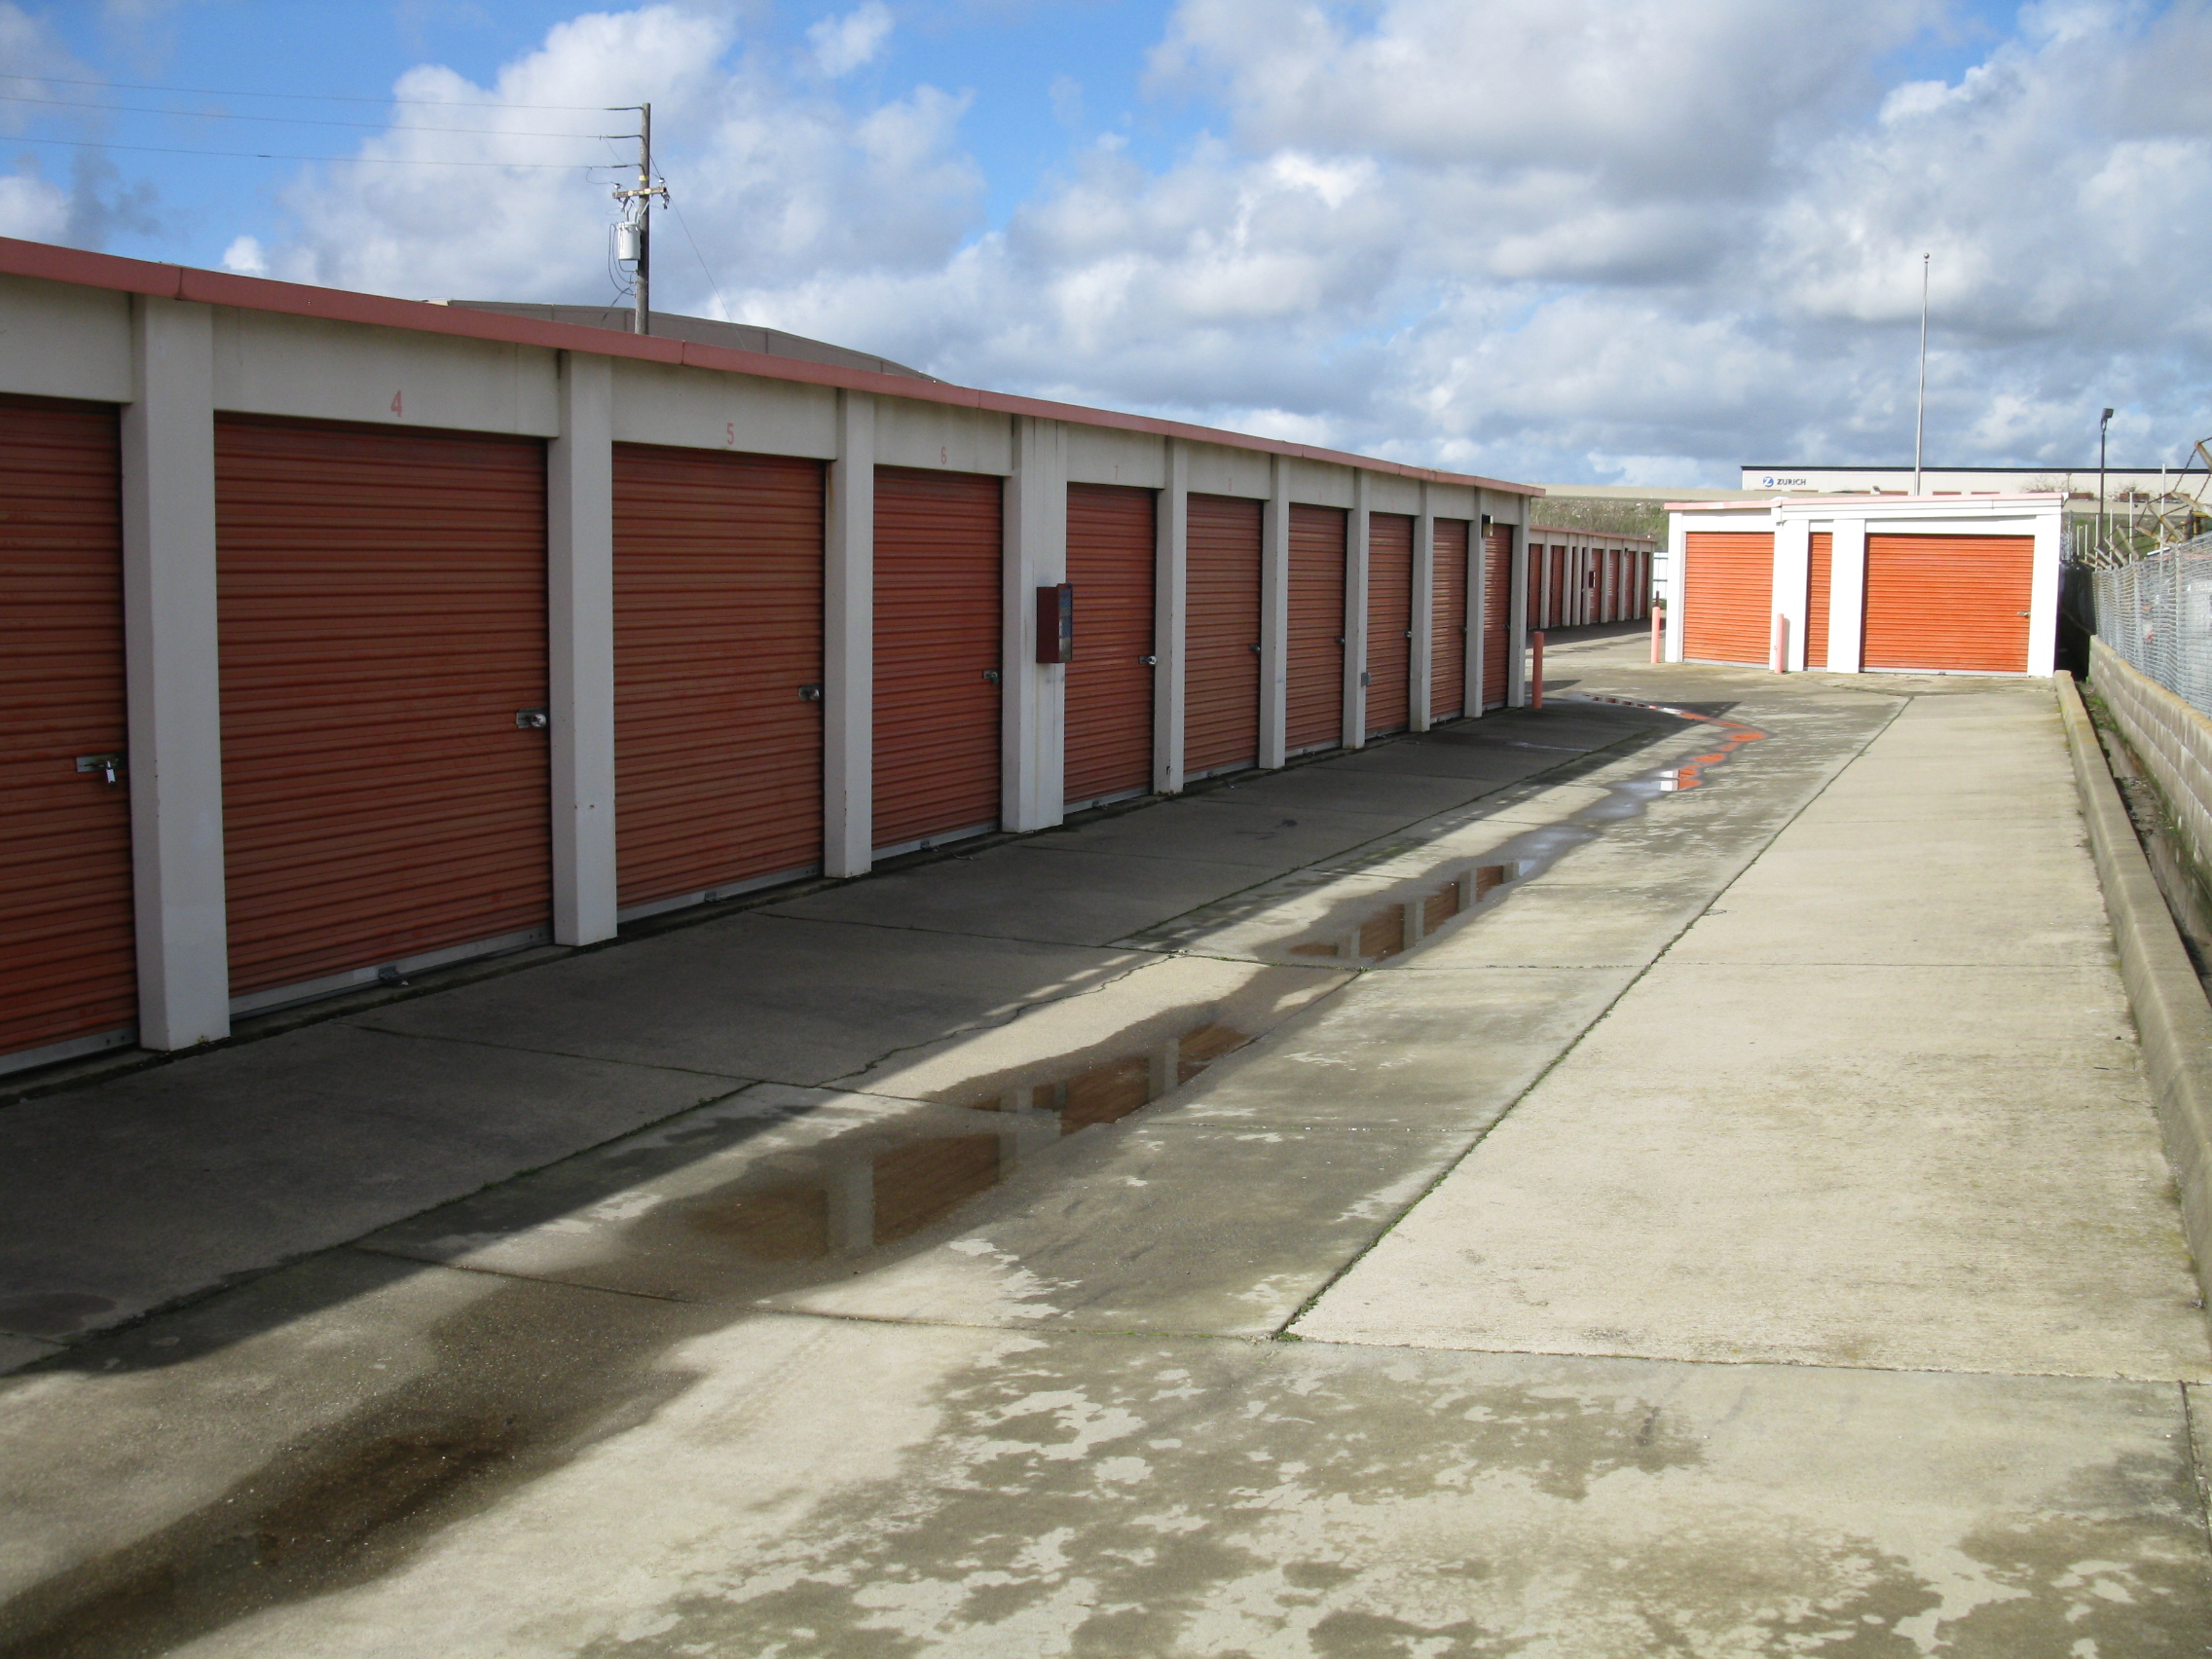 Sentry Storage on Folsom Blvd has wide isles for large moving trucks and easy maneuvering 